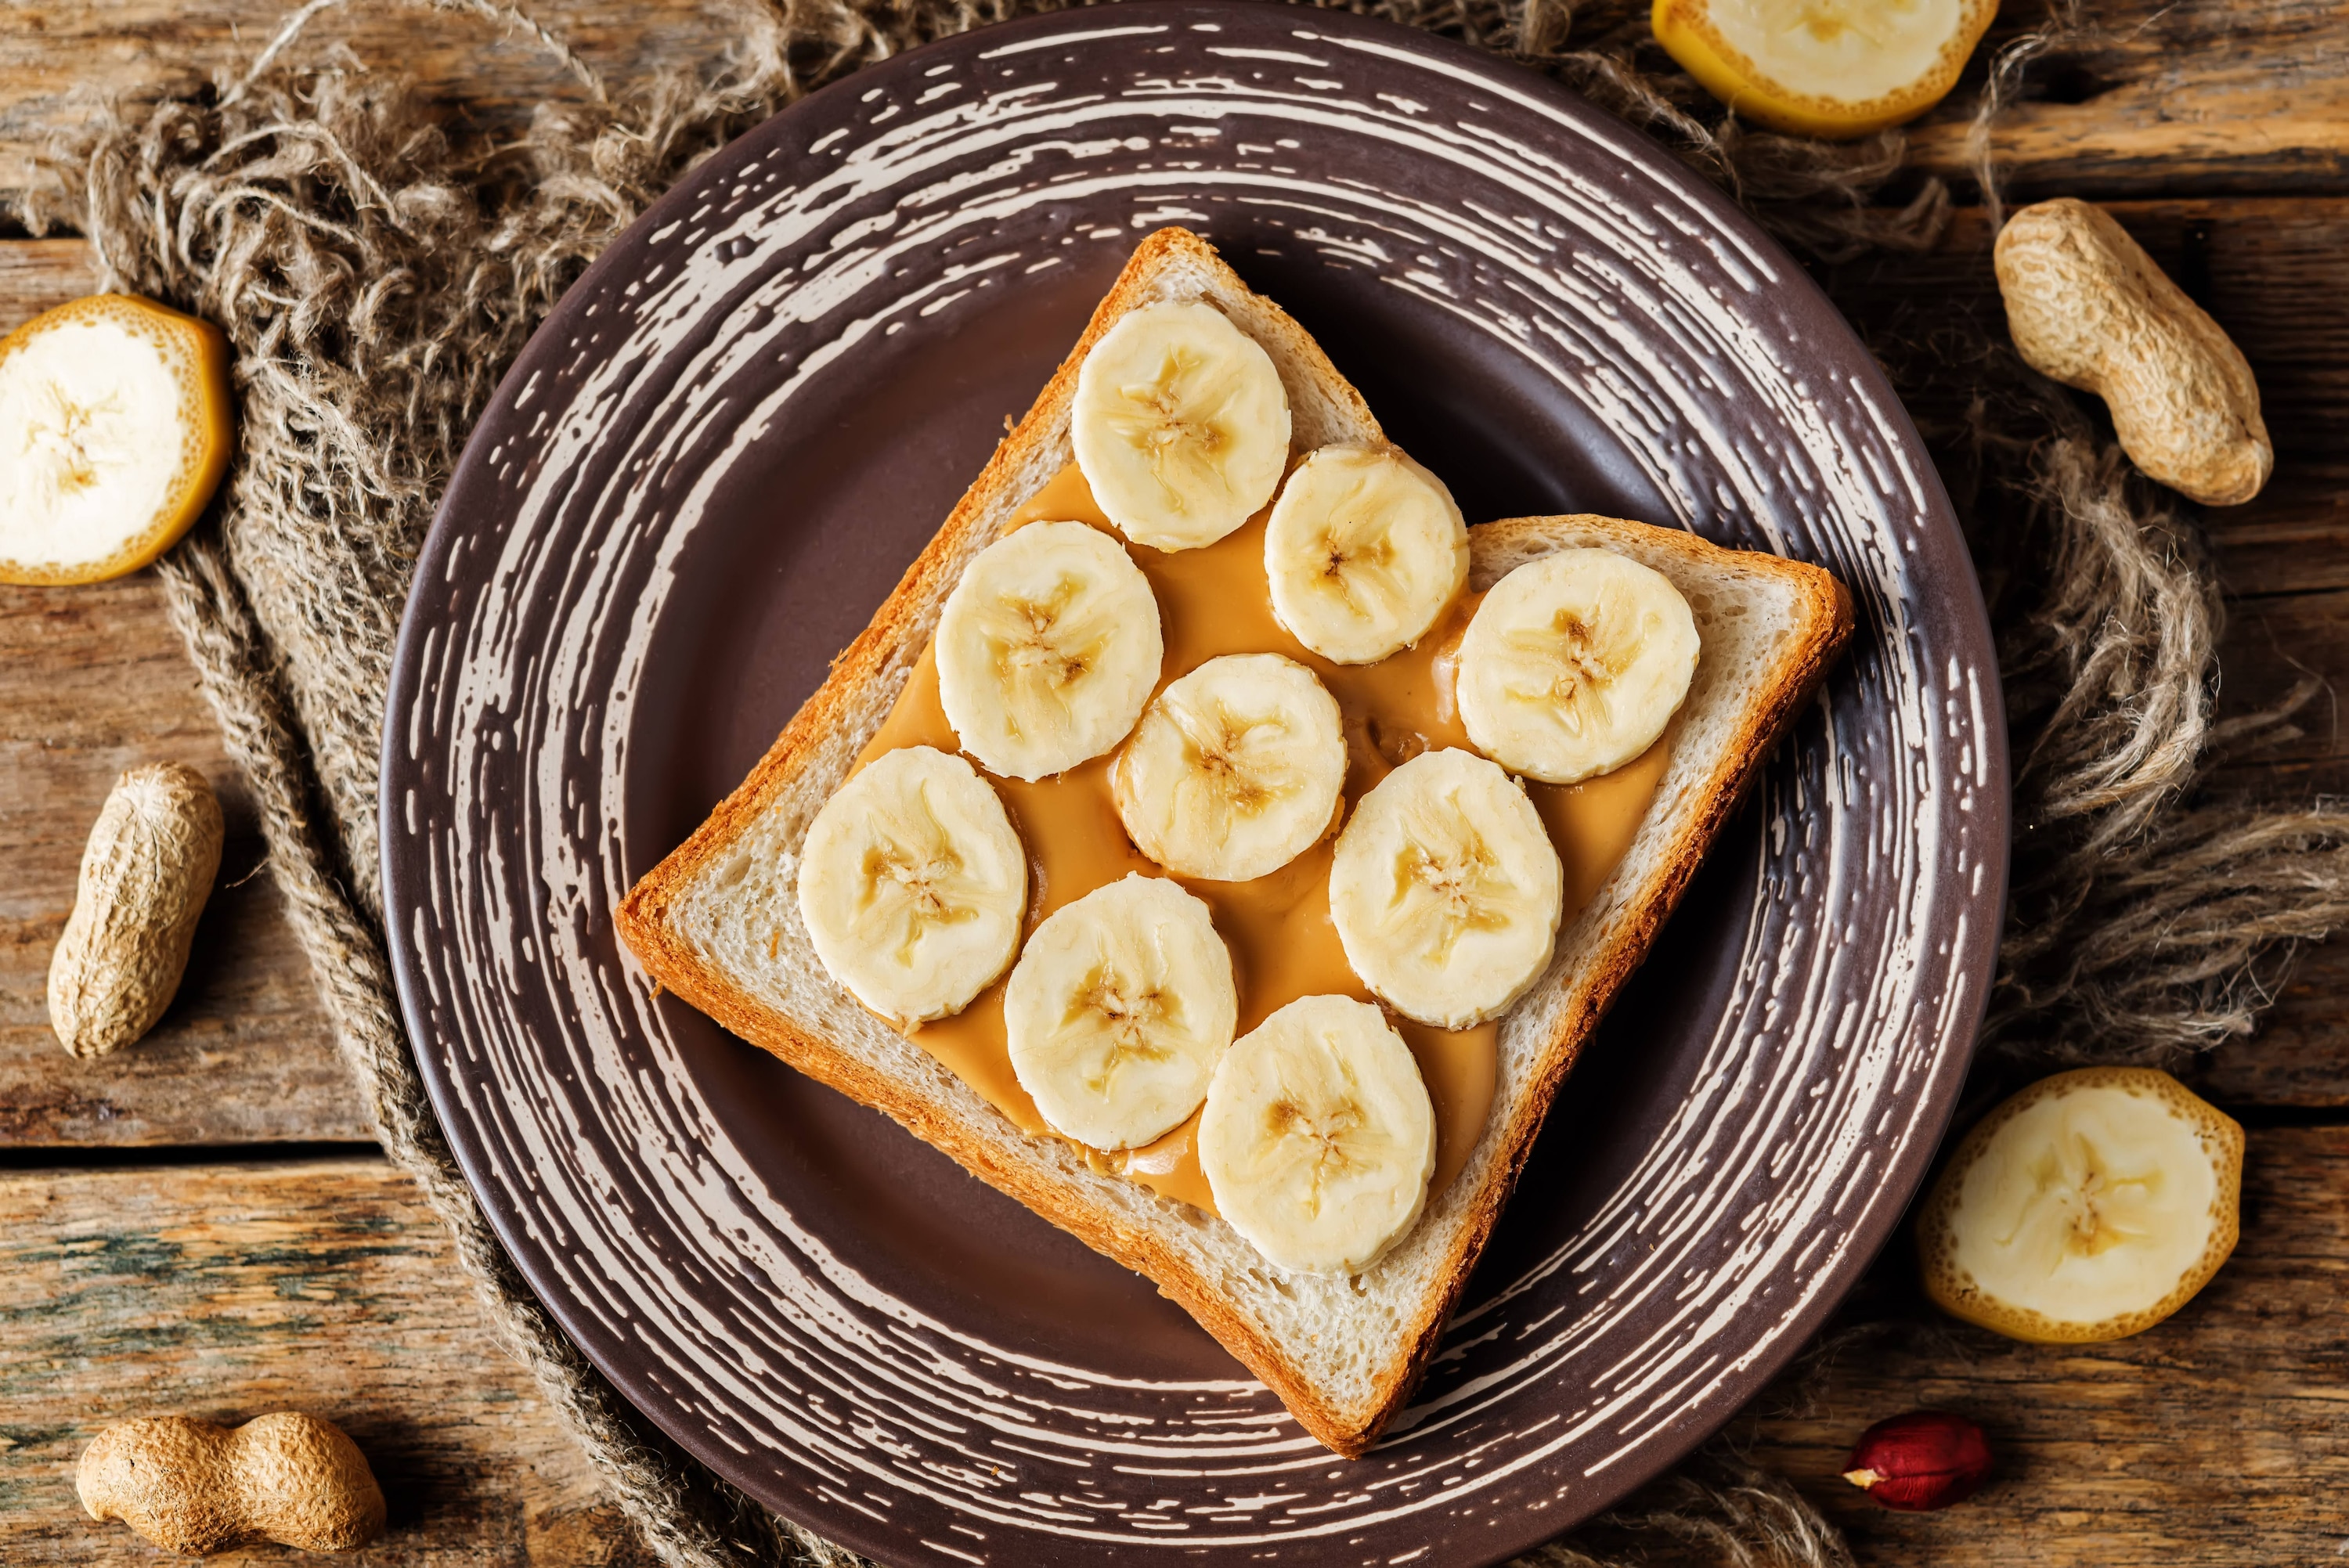 Caramelized bananas with peanut butter on toast